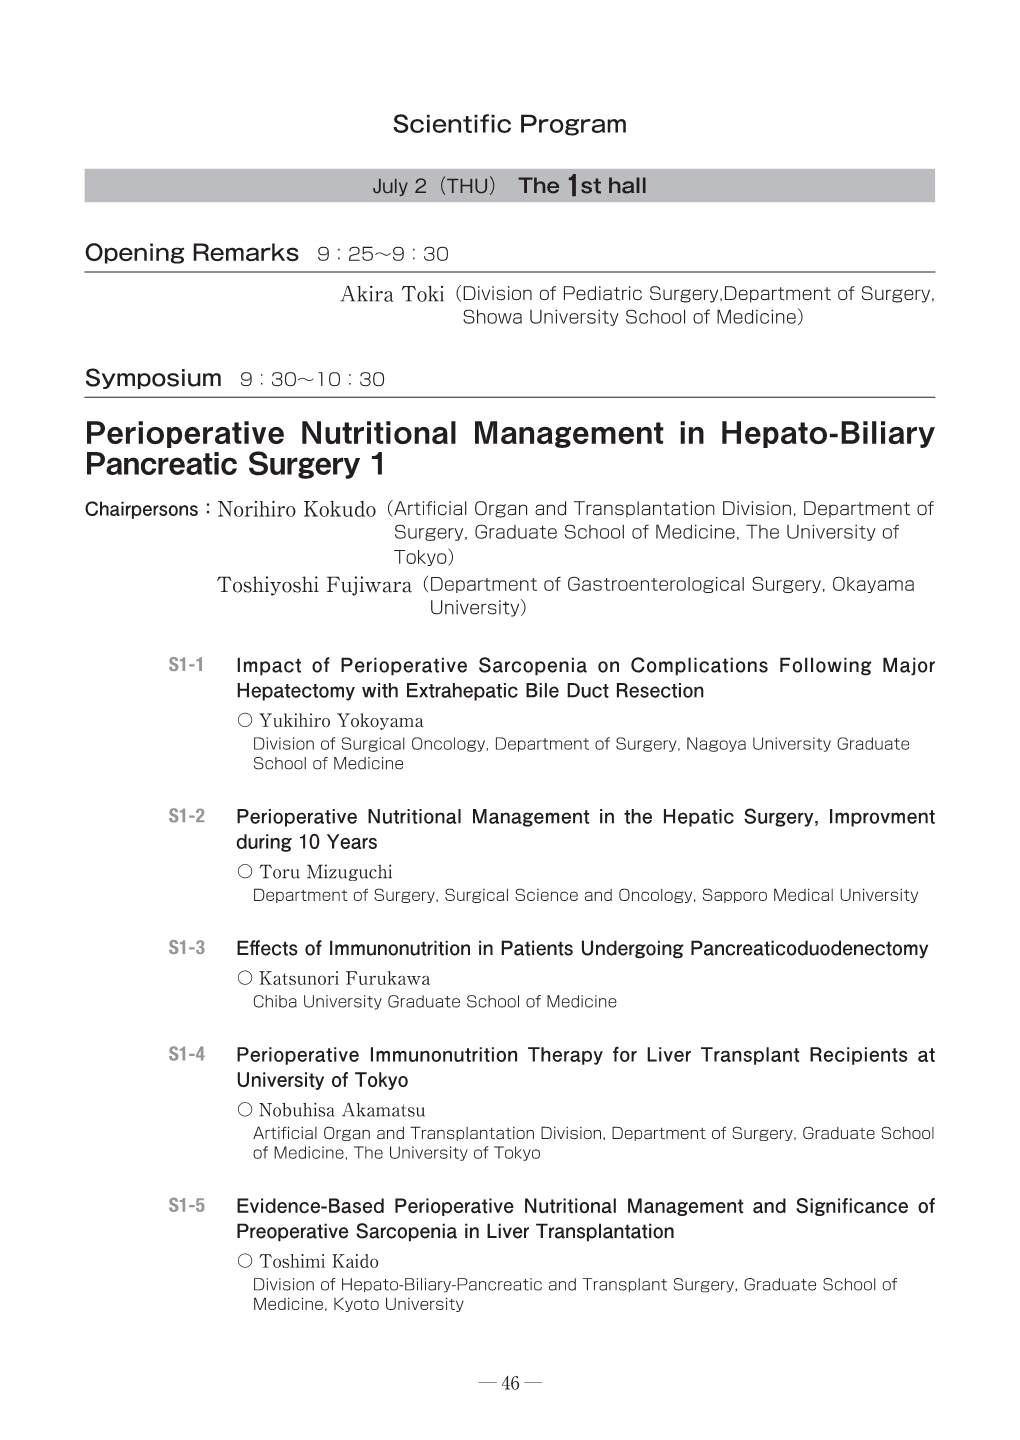 Perioperative Nutritional Management in Hepato-Biliary Pancreatic